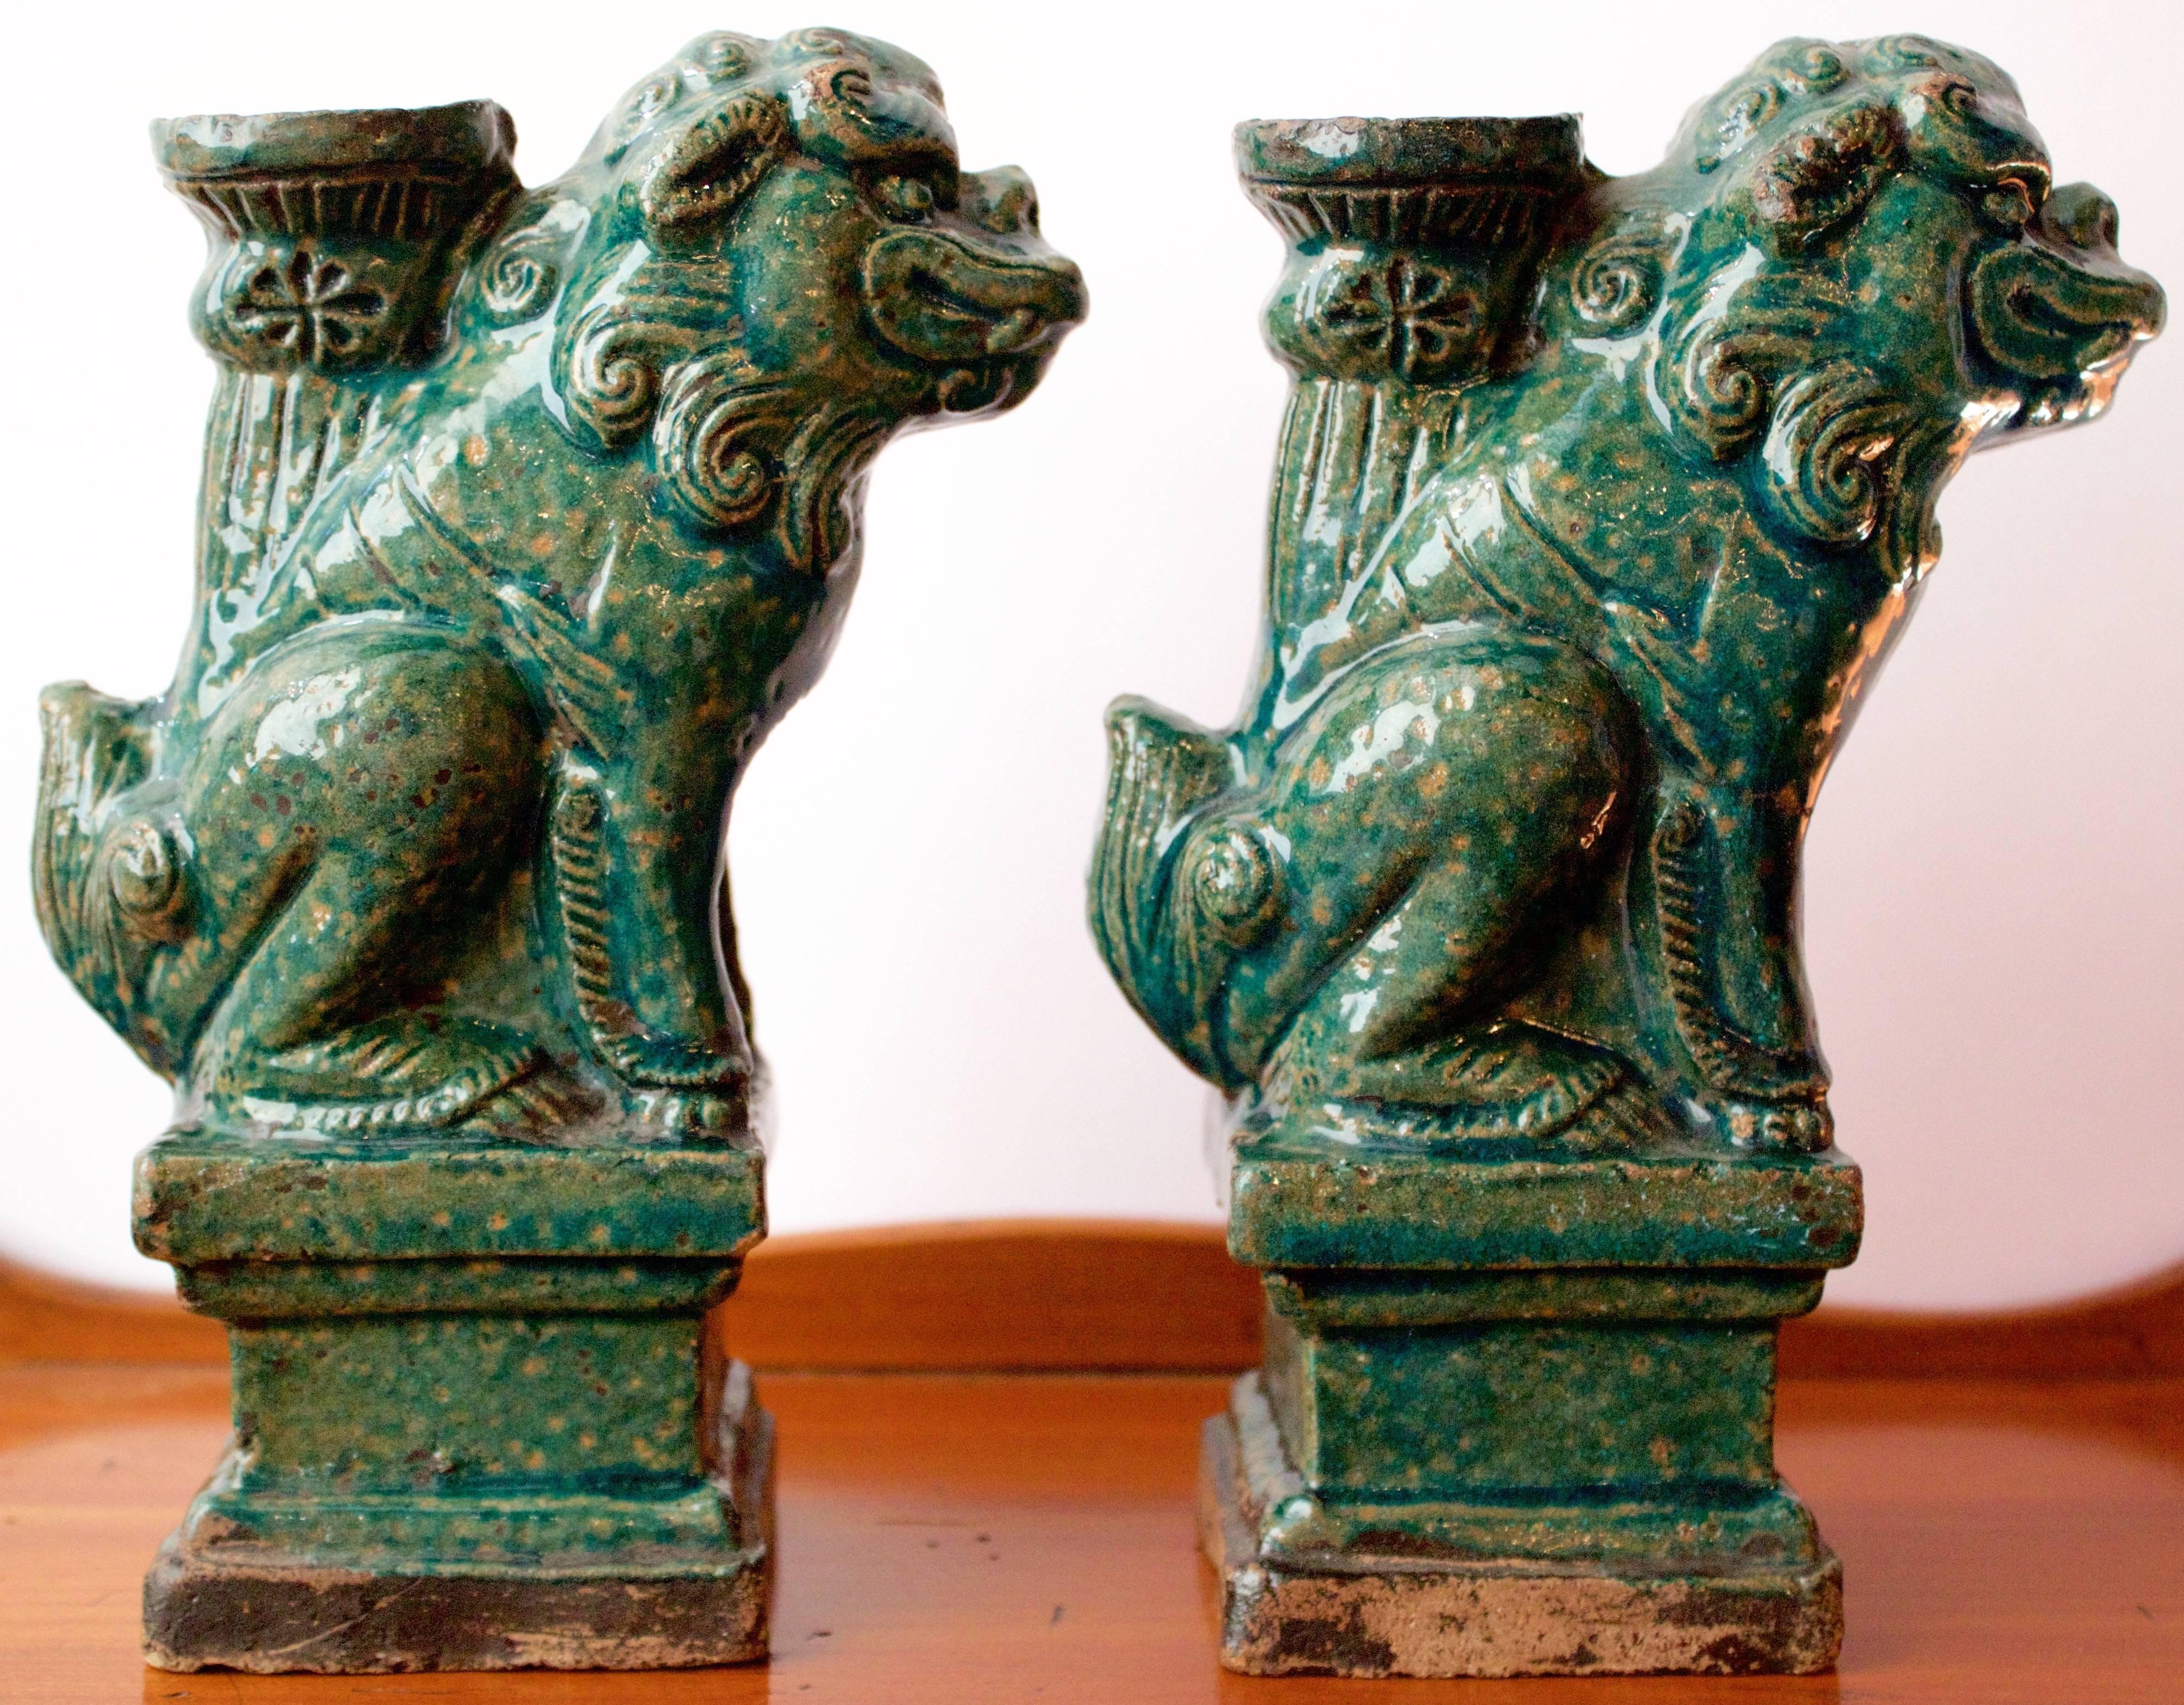 Pair of antique Chinese Joss Sticks made of stoneware and celadon glaze. Each figure represents a foo lion or guardian.